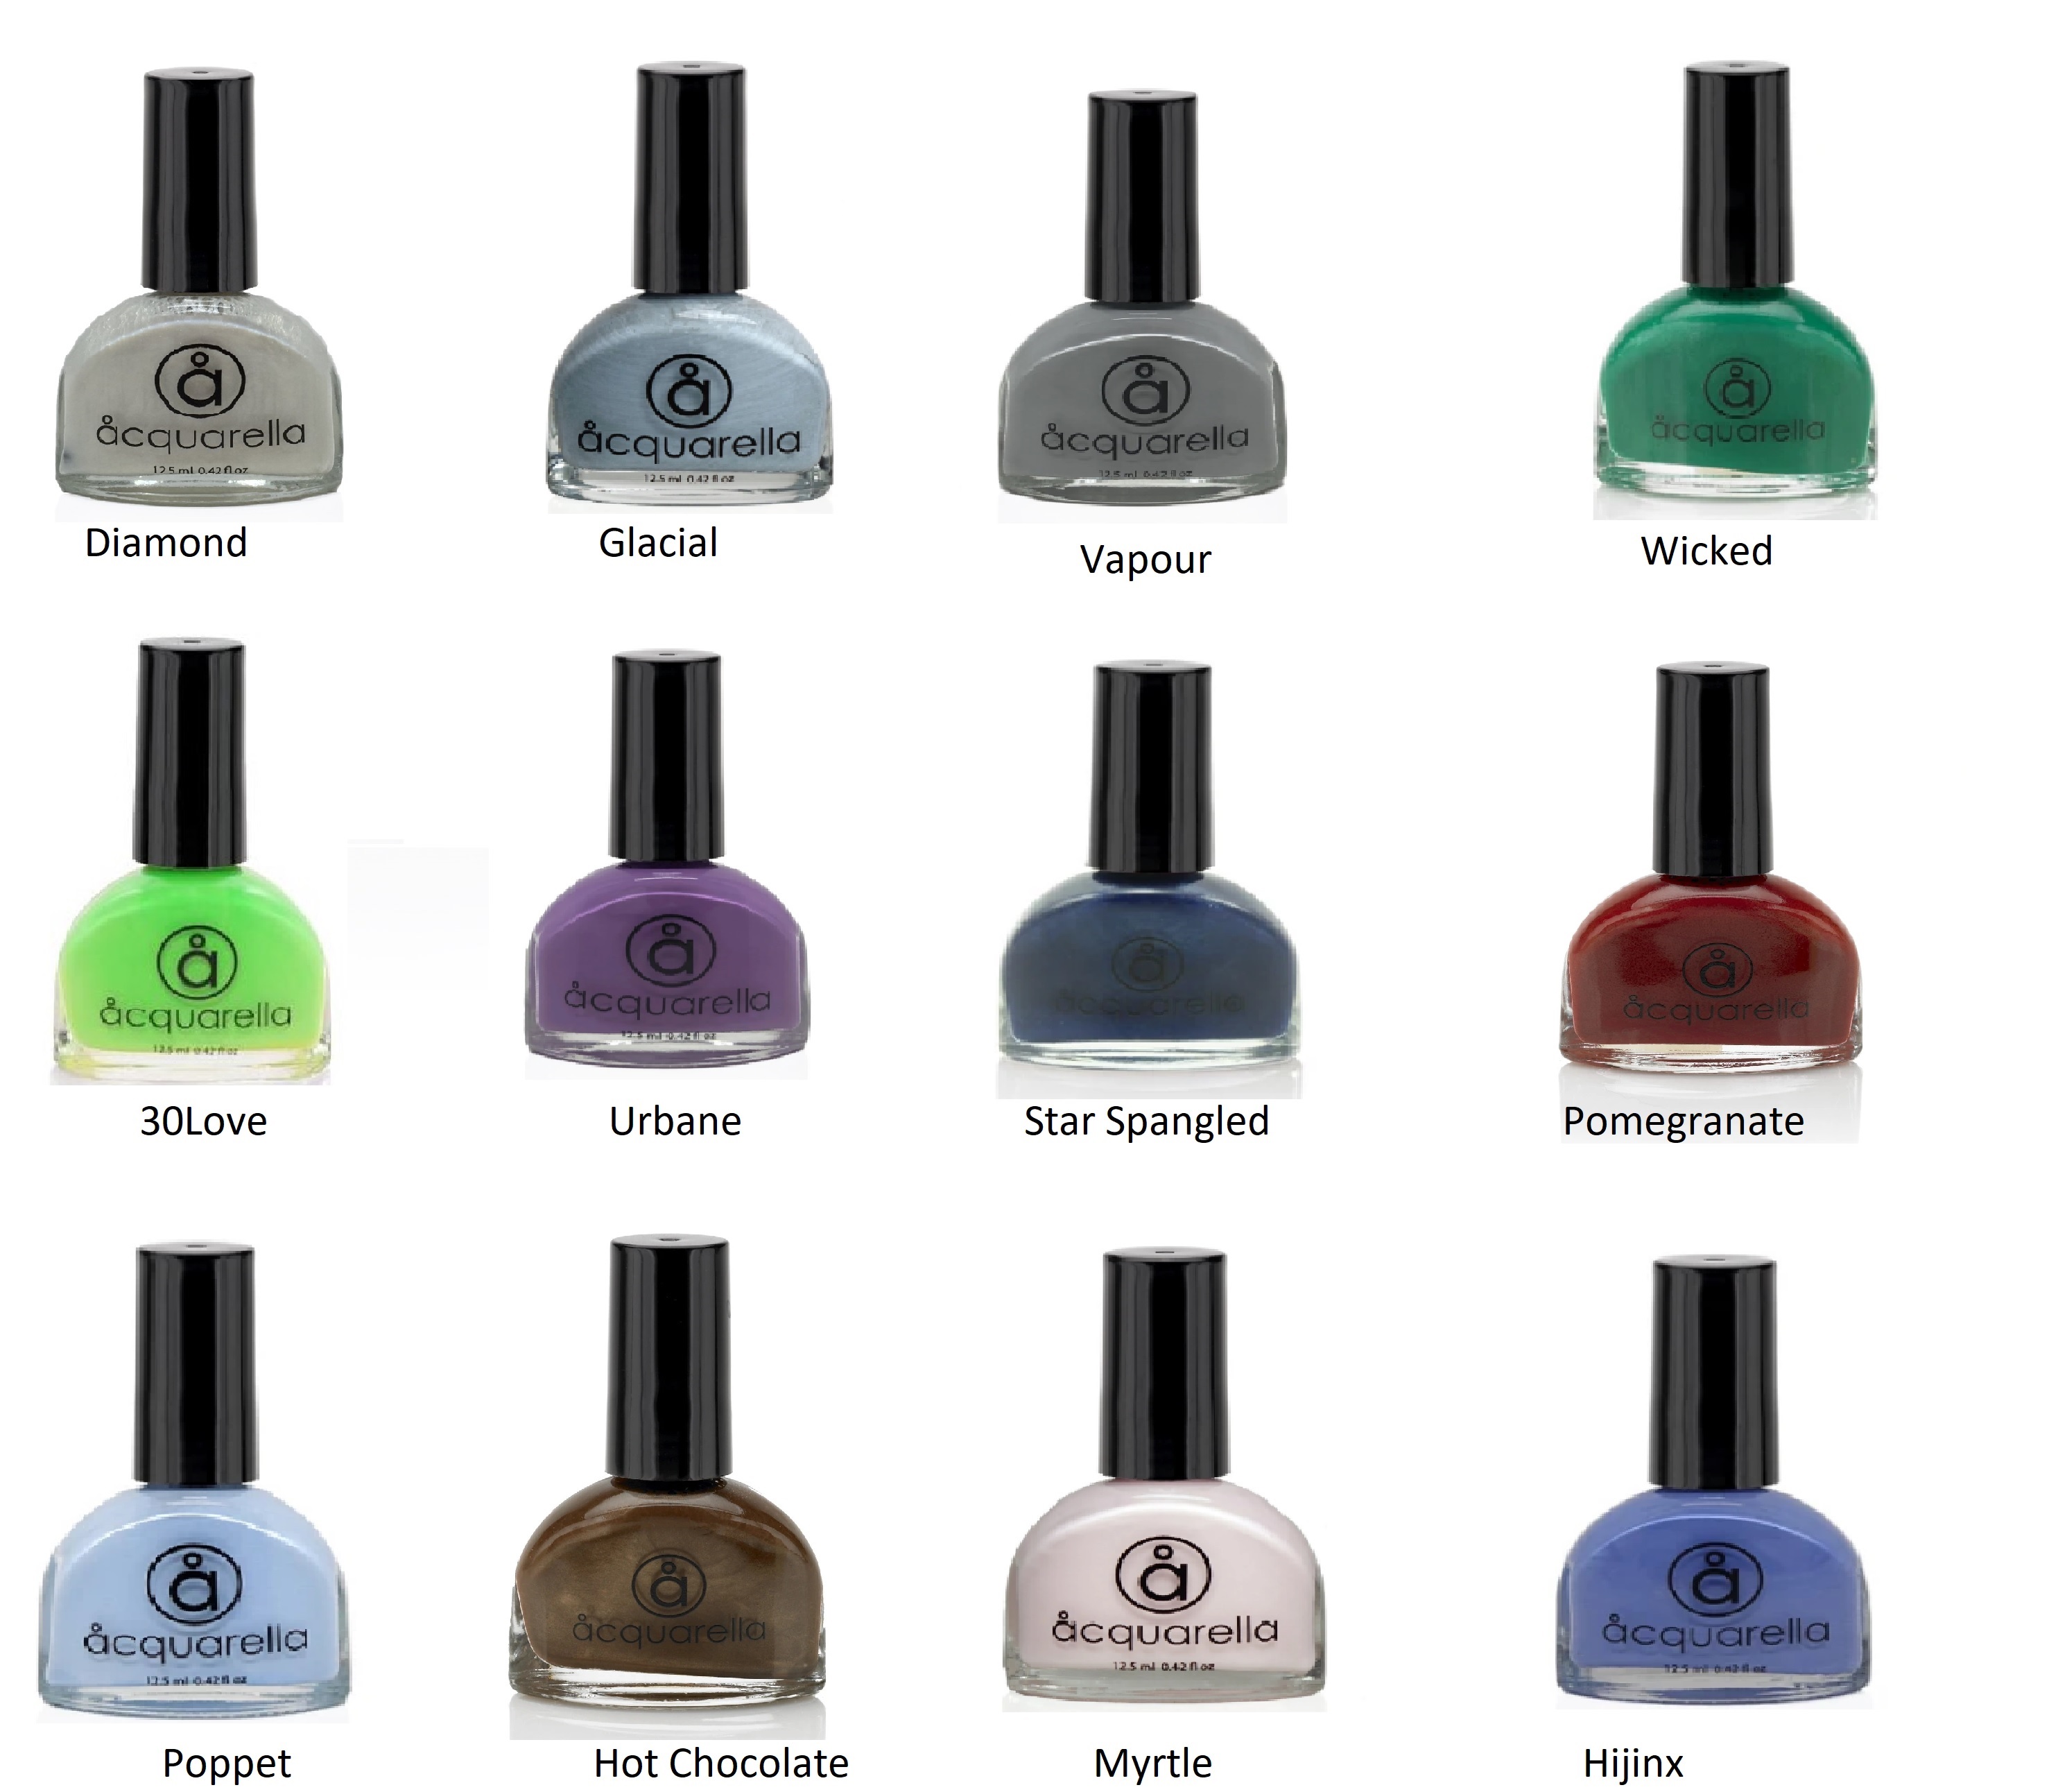 The Best Clean and Natural Nail Polish Brands